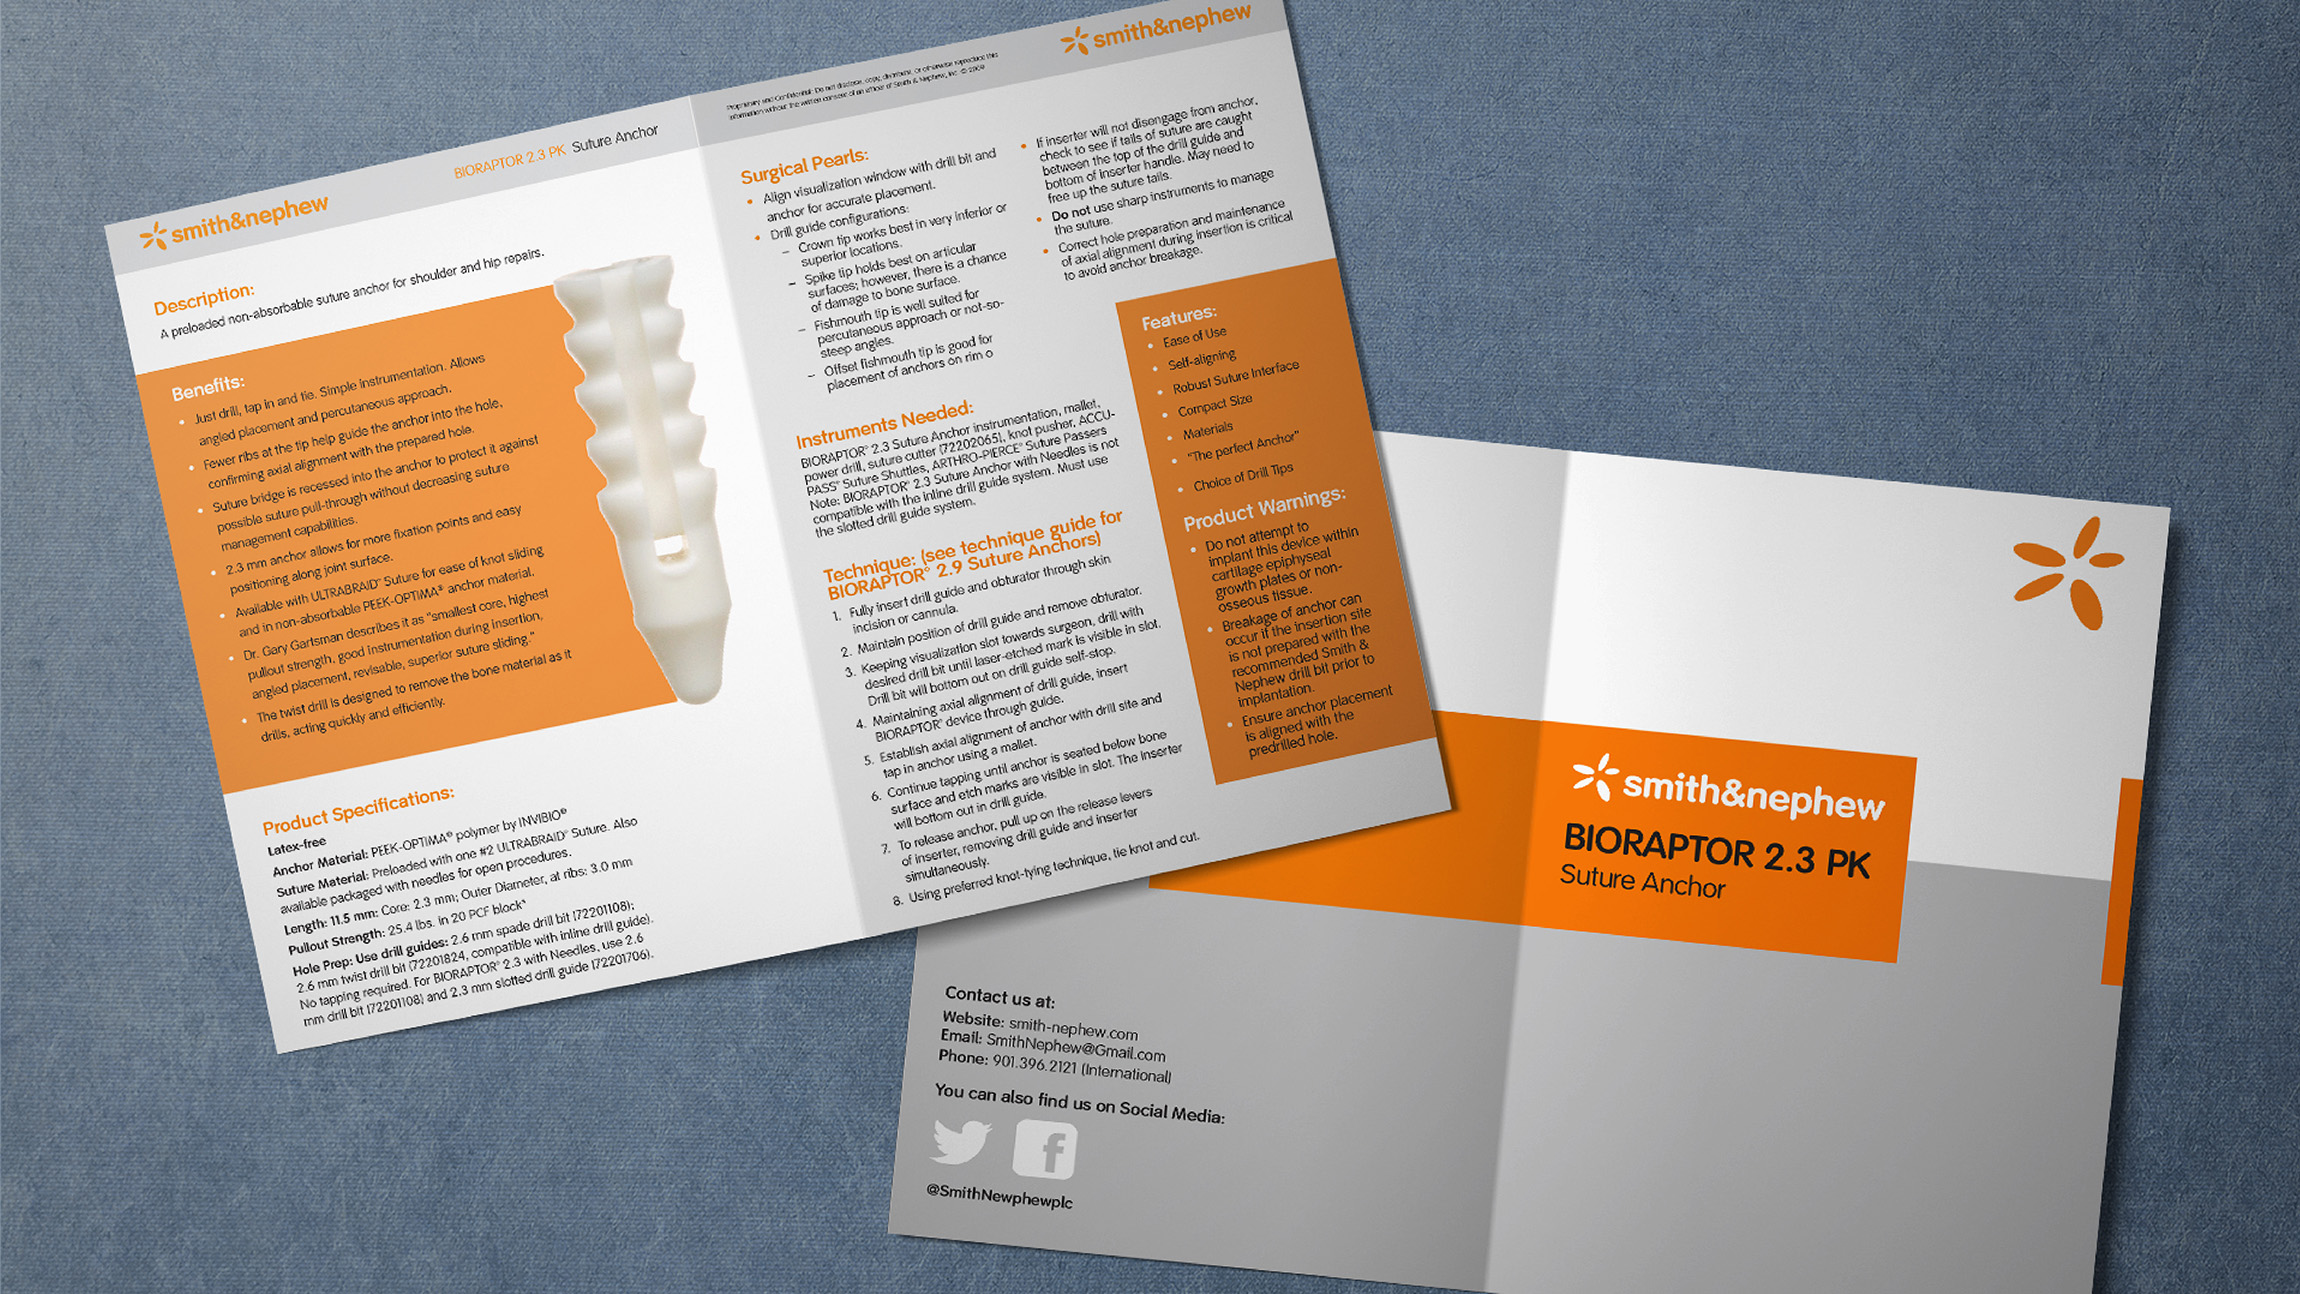 “Smith & Nephew Reference Guide”  / “Smith & Nephew Reference Guide,” Medical brochure, 6"x8" inches, 2021.